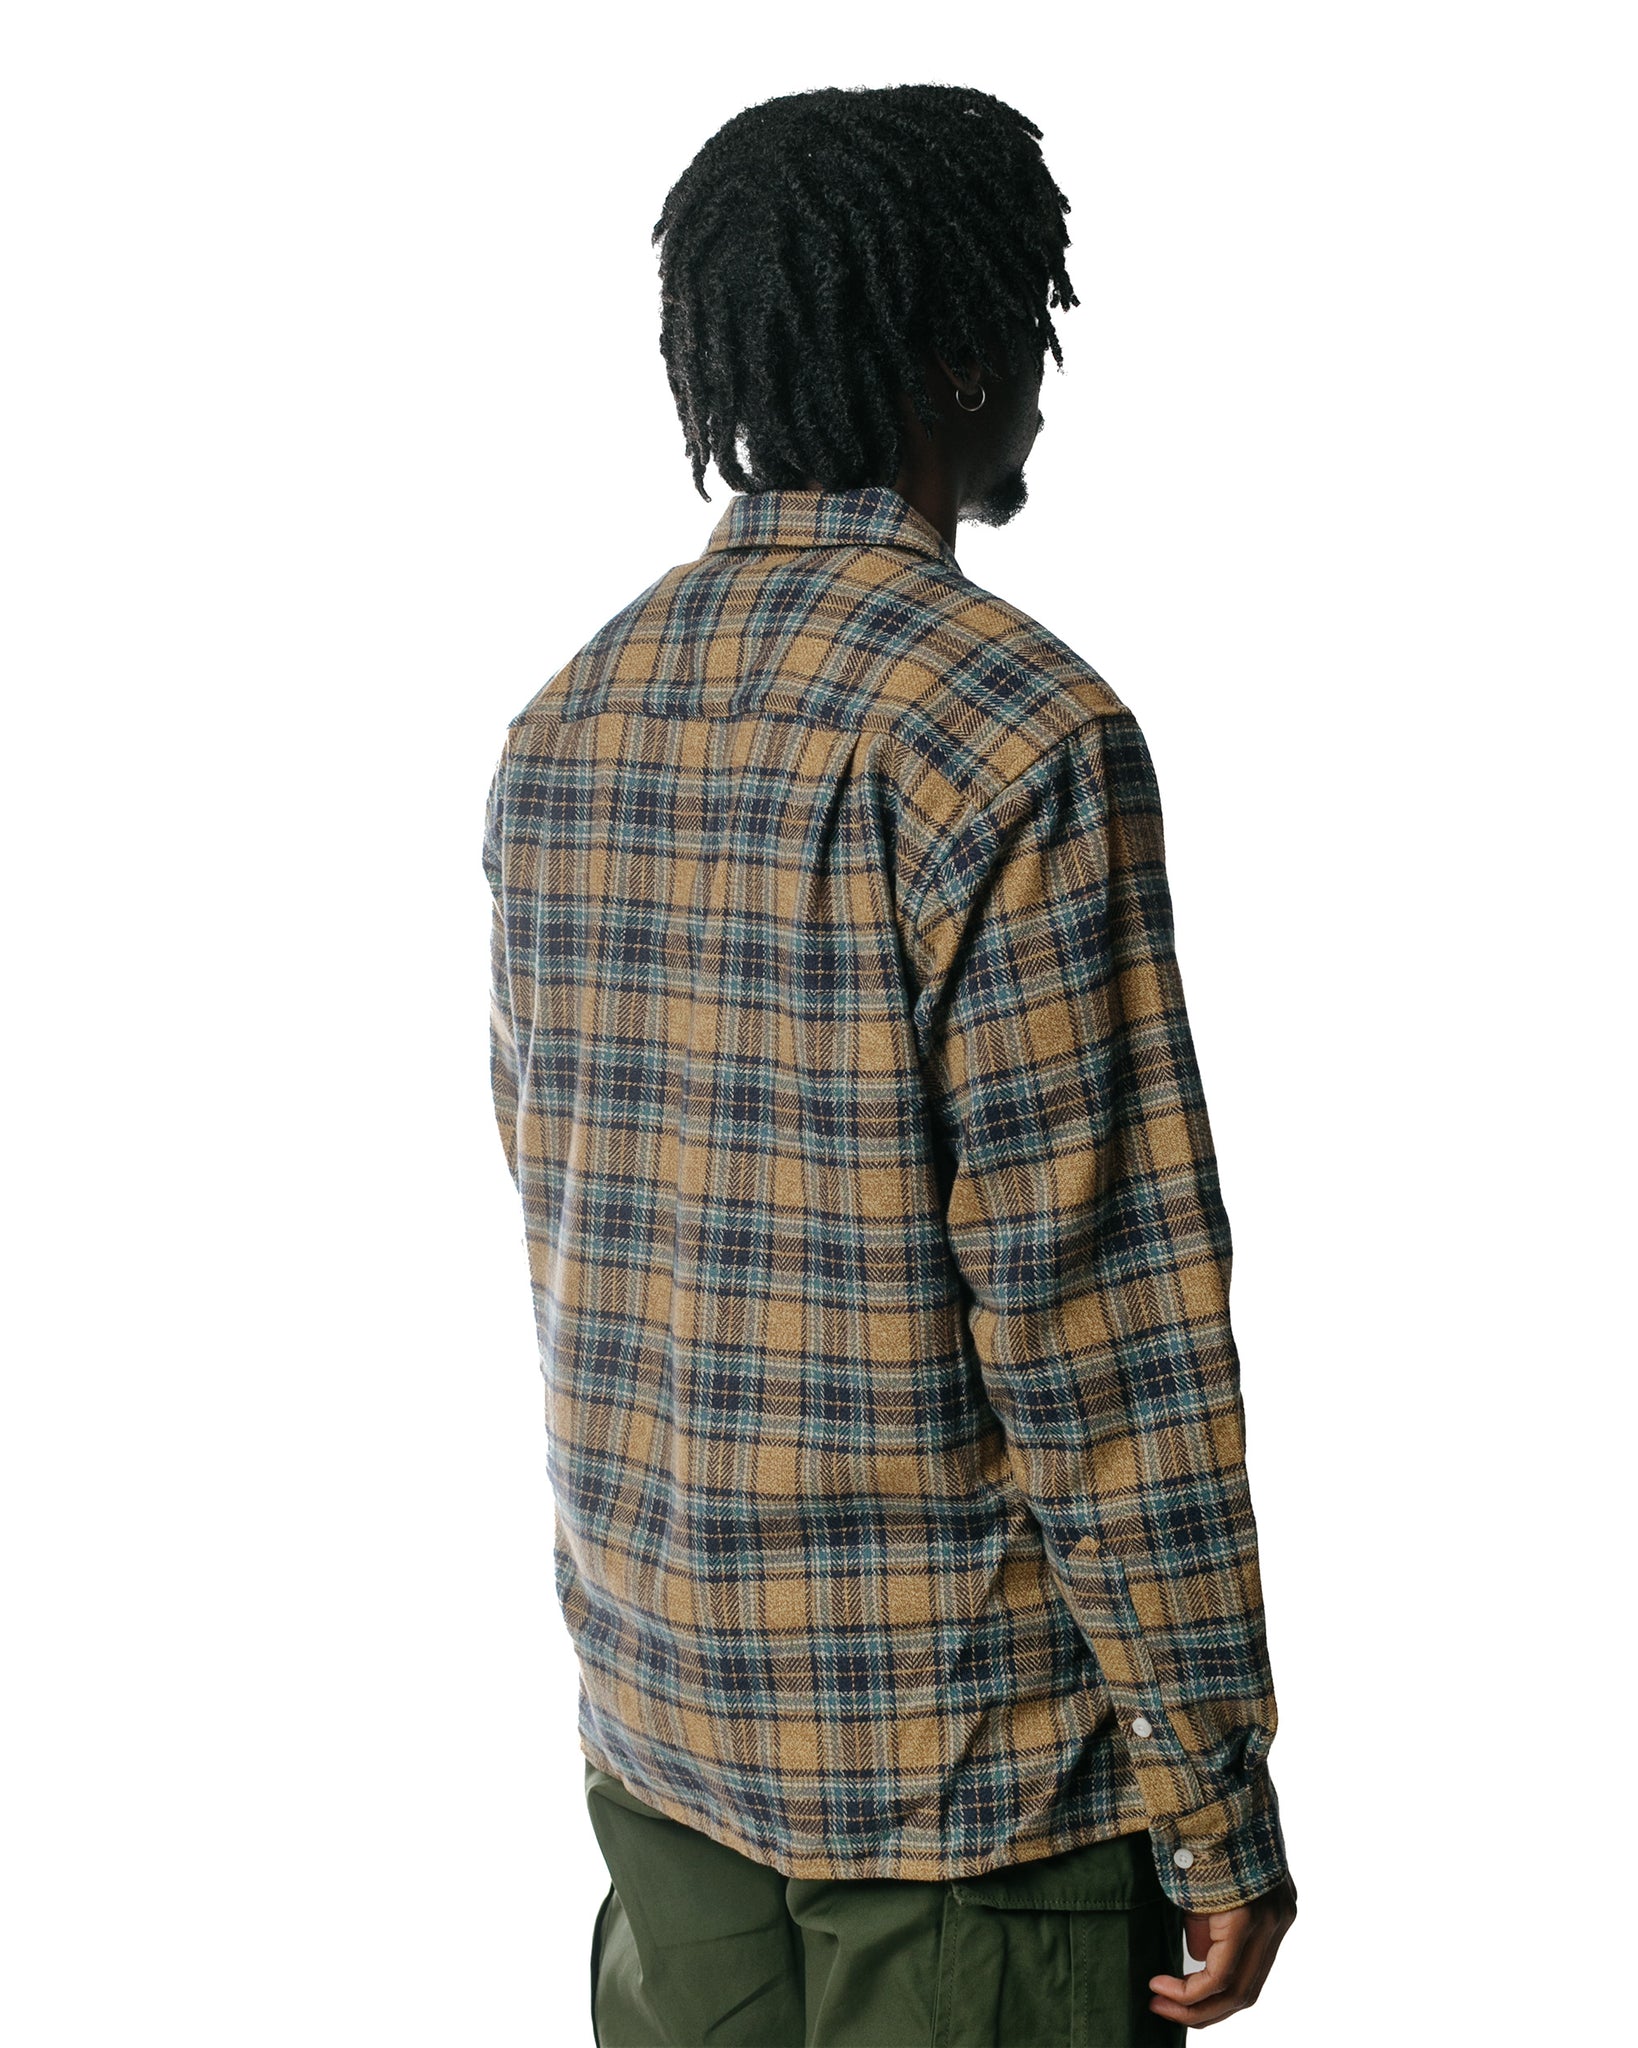 Men's Organic Cotton Vintage Check Shirt in Hoxton Check Red